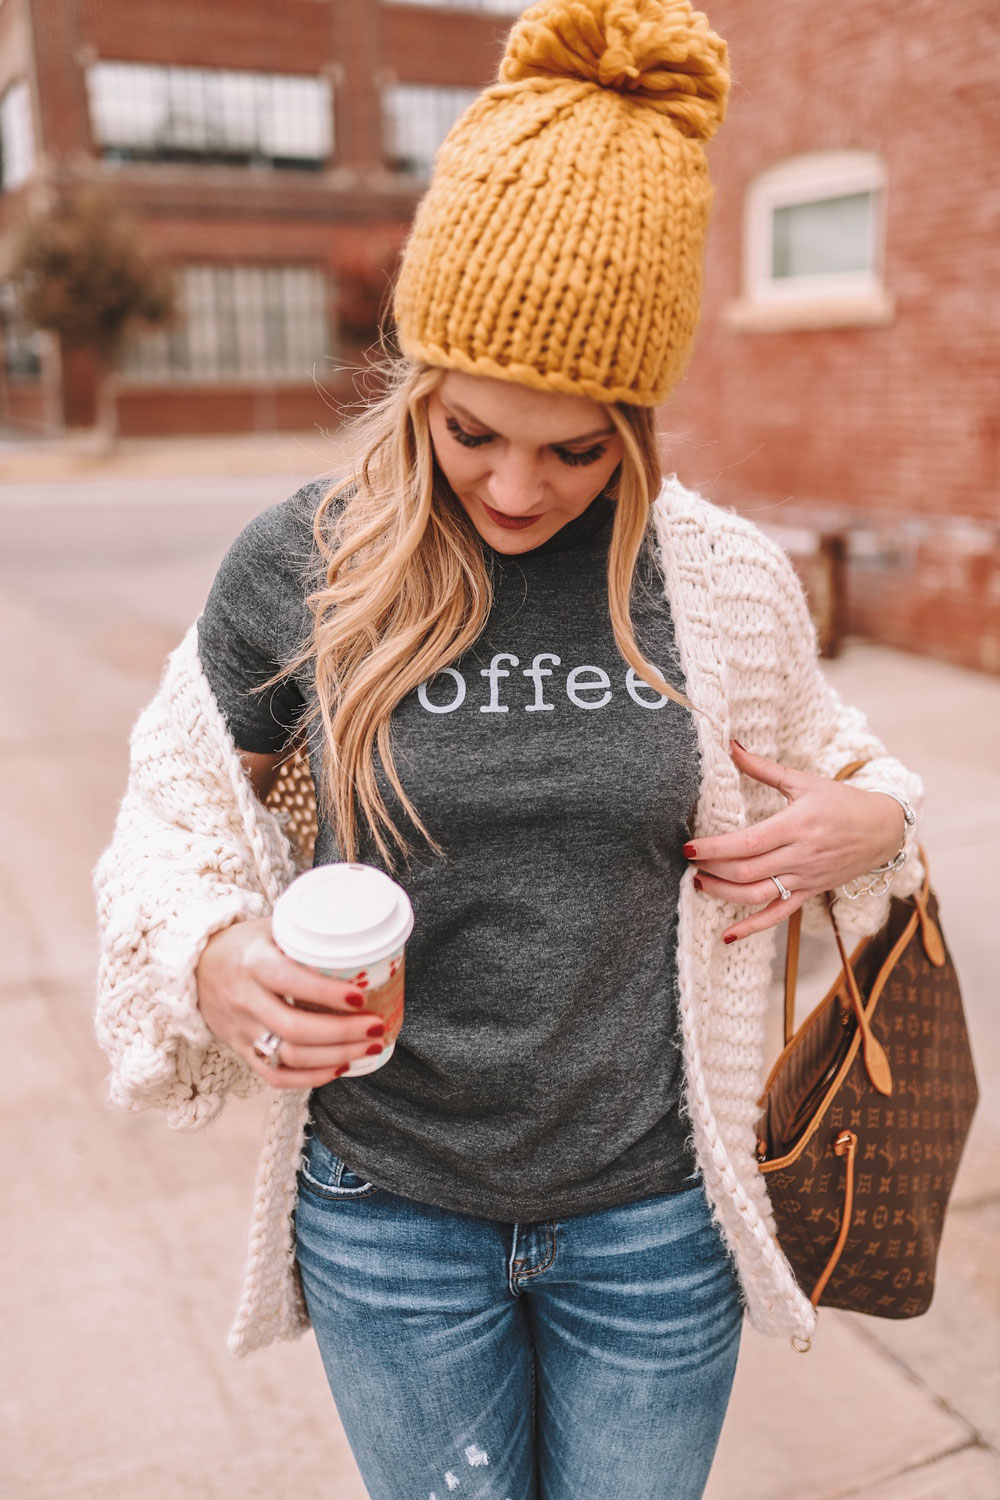 OKC blogger Amanda Martin cozied up in a chunky knit cardigan and a yellow pom knit beanie